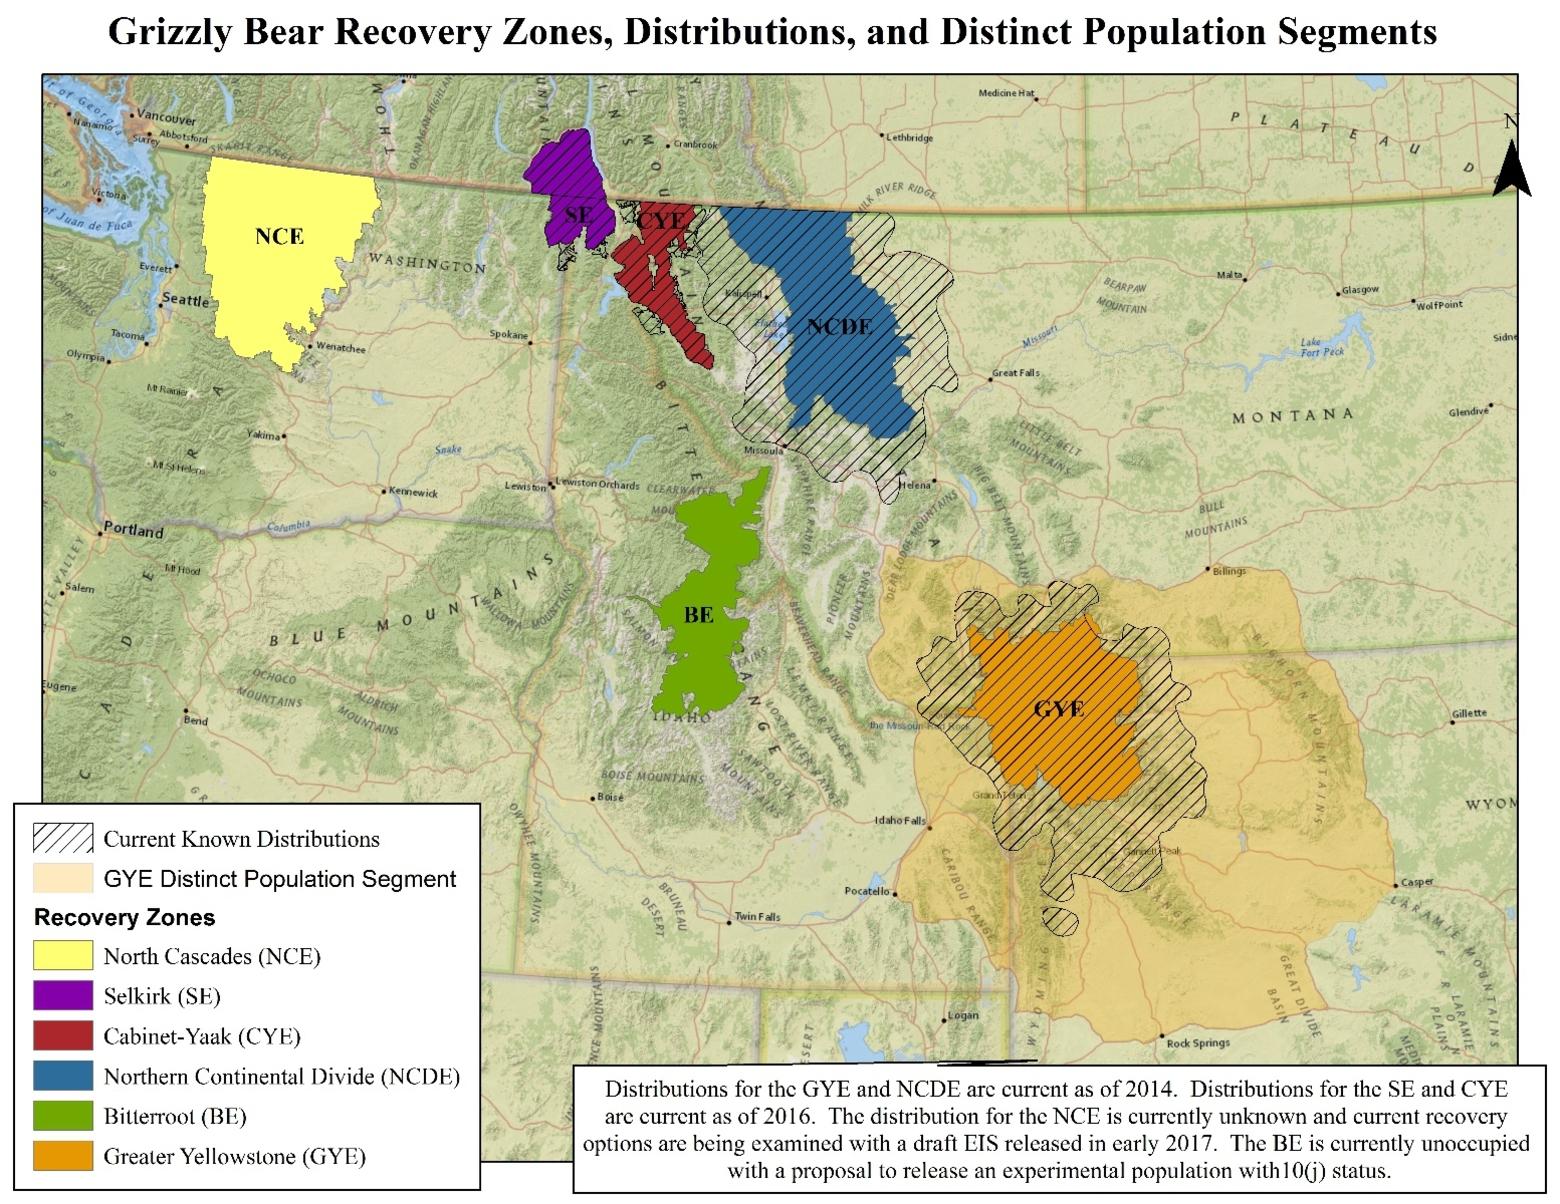 A map showing existing grizzly bear populations in the Lower 48 states.  Lance Olsen notes that communities around both the Greater Yellowstone (orange) and Northern Continental Divide (blue) are among the fastest growing in the country. The best hope for achieving real bear recovery is having a grizzly &quot;metapopulation&quot; which would involve connecting Greater Yellowstone with the Northern Continental Divide ecosystems and getting grizzlies restored to the Bitterroot Ecosystem (marked in green). Map courtesy U.S. Fish and Wildlife Service. 